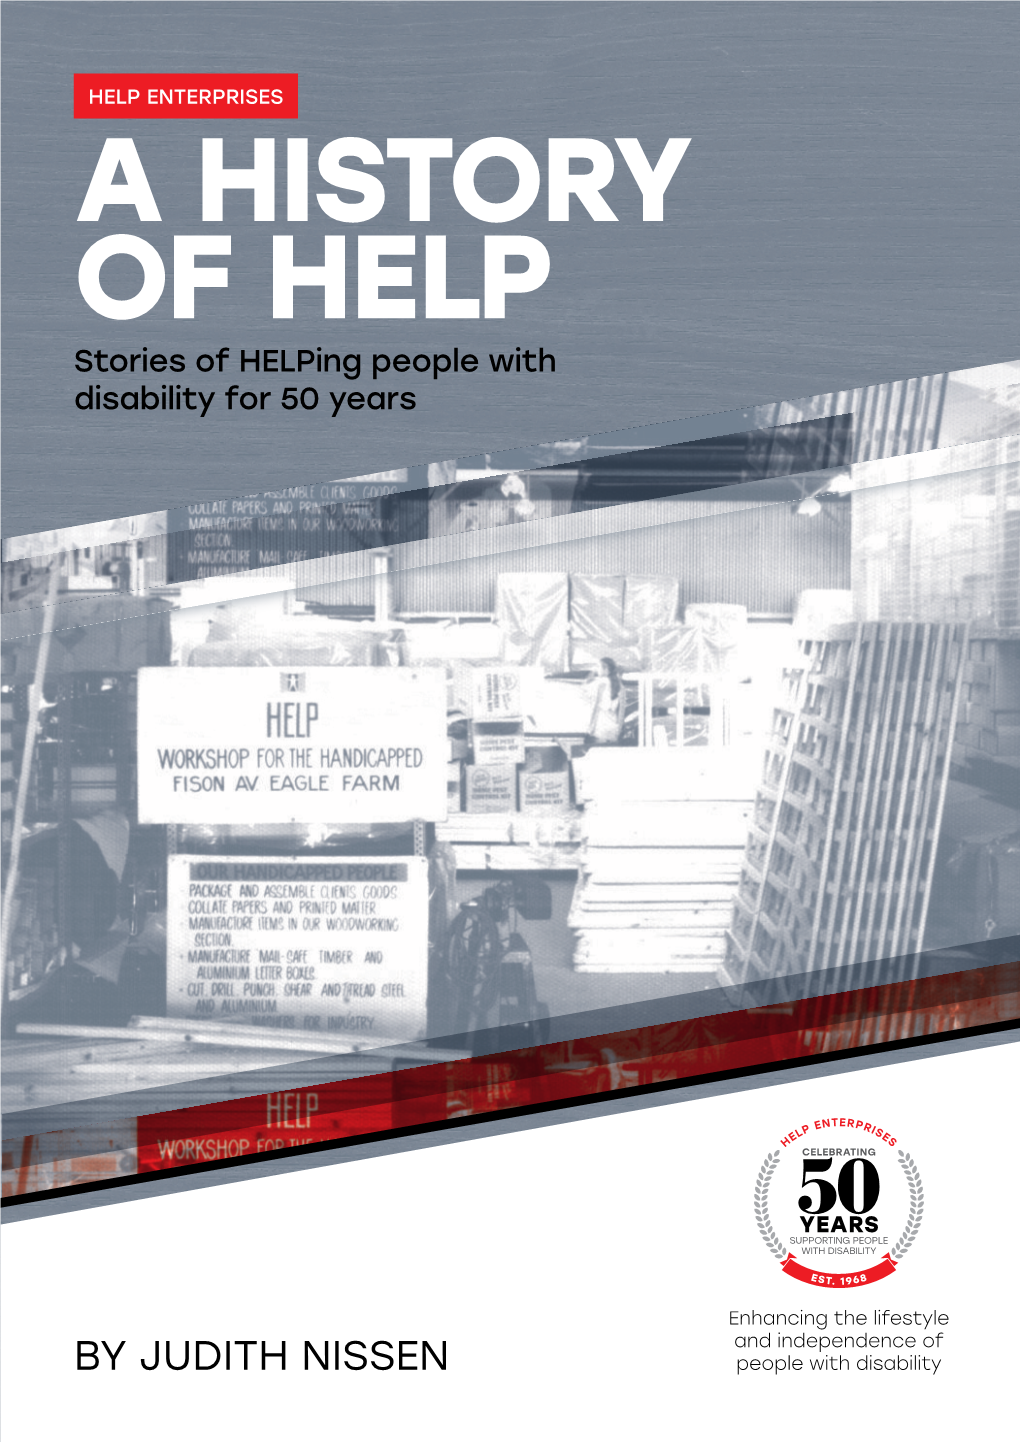 A HISTORY of HELP Stories of Helping People with Disability for 50 Years